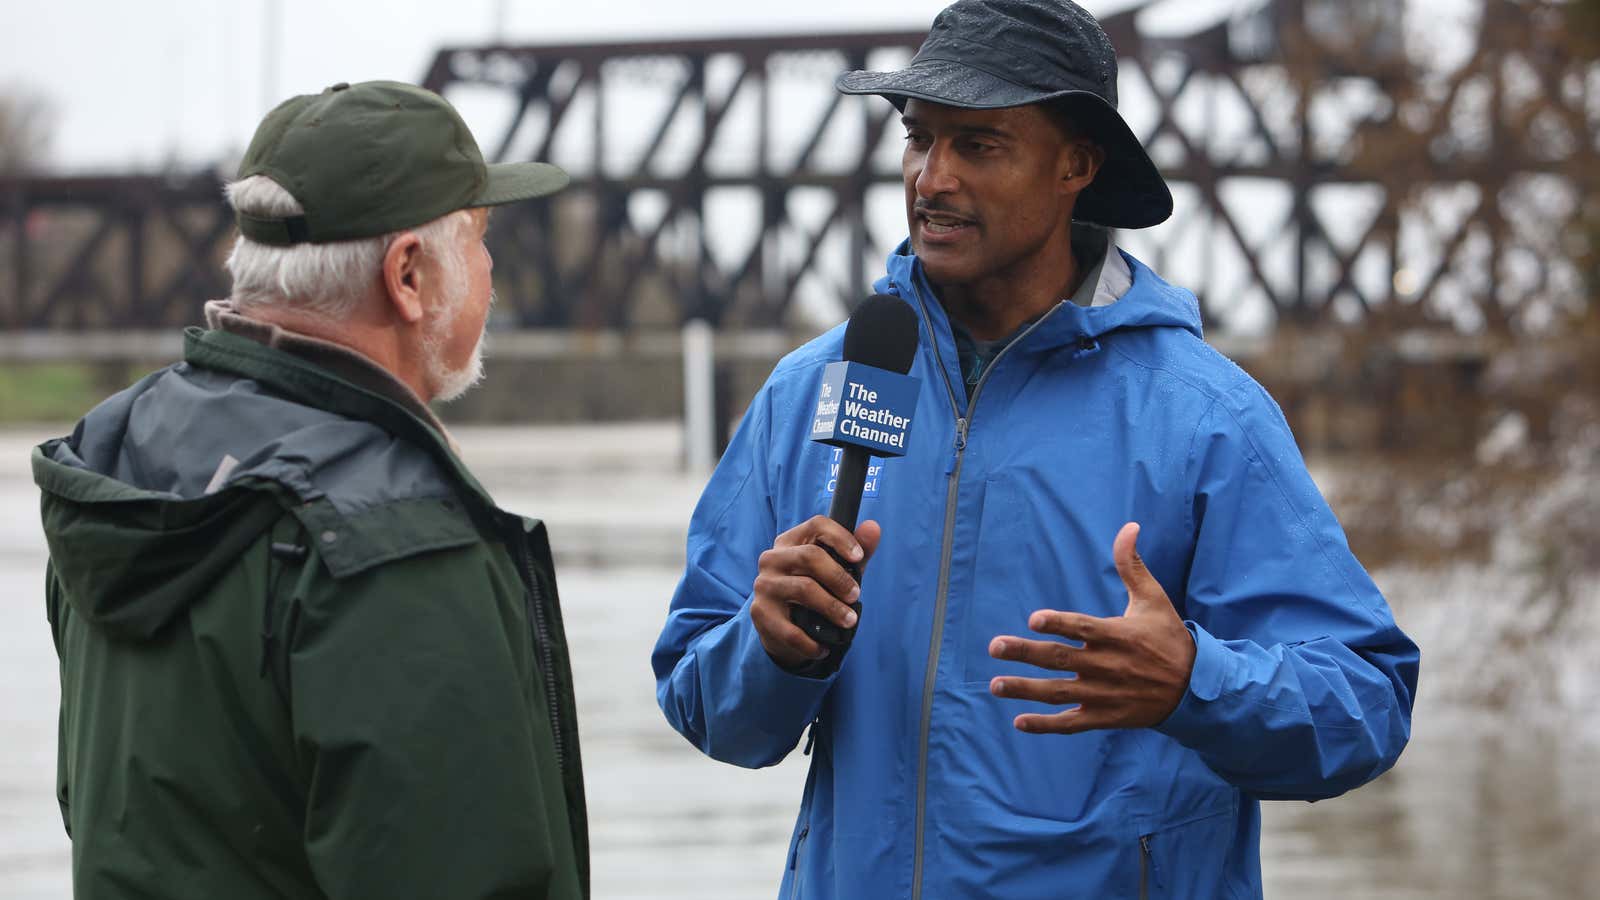 I'm Paul Goodloe, Meteorologist at The Weather Channel, and This Is How I Parent